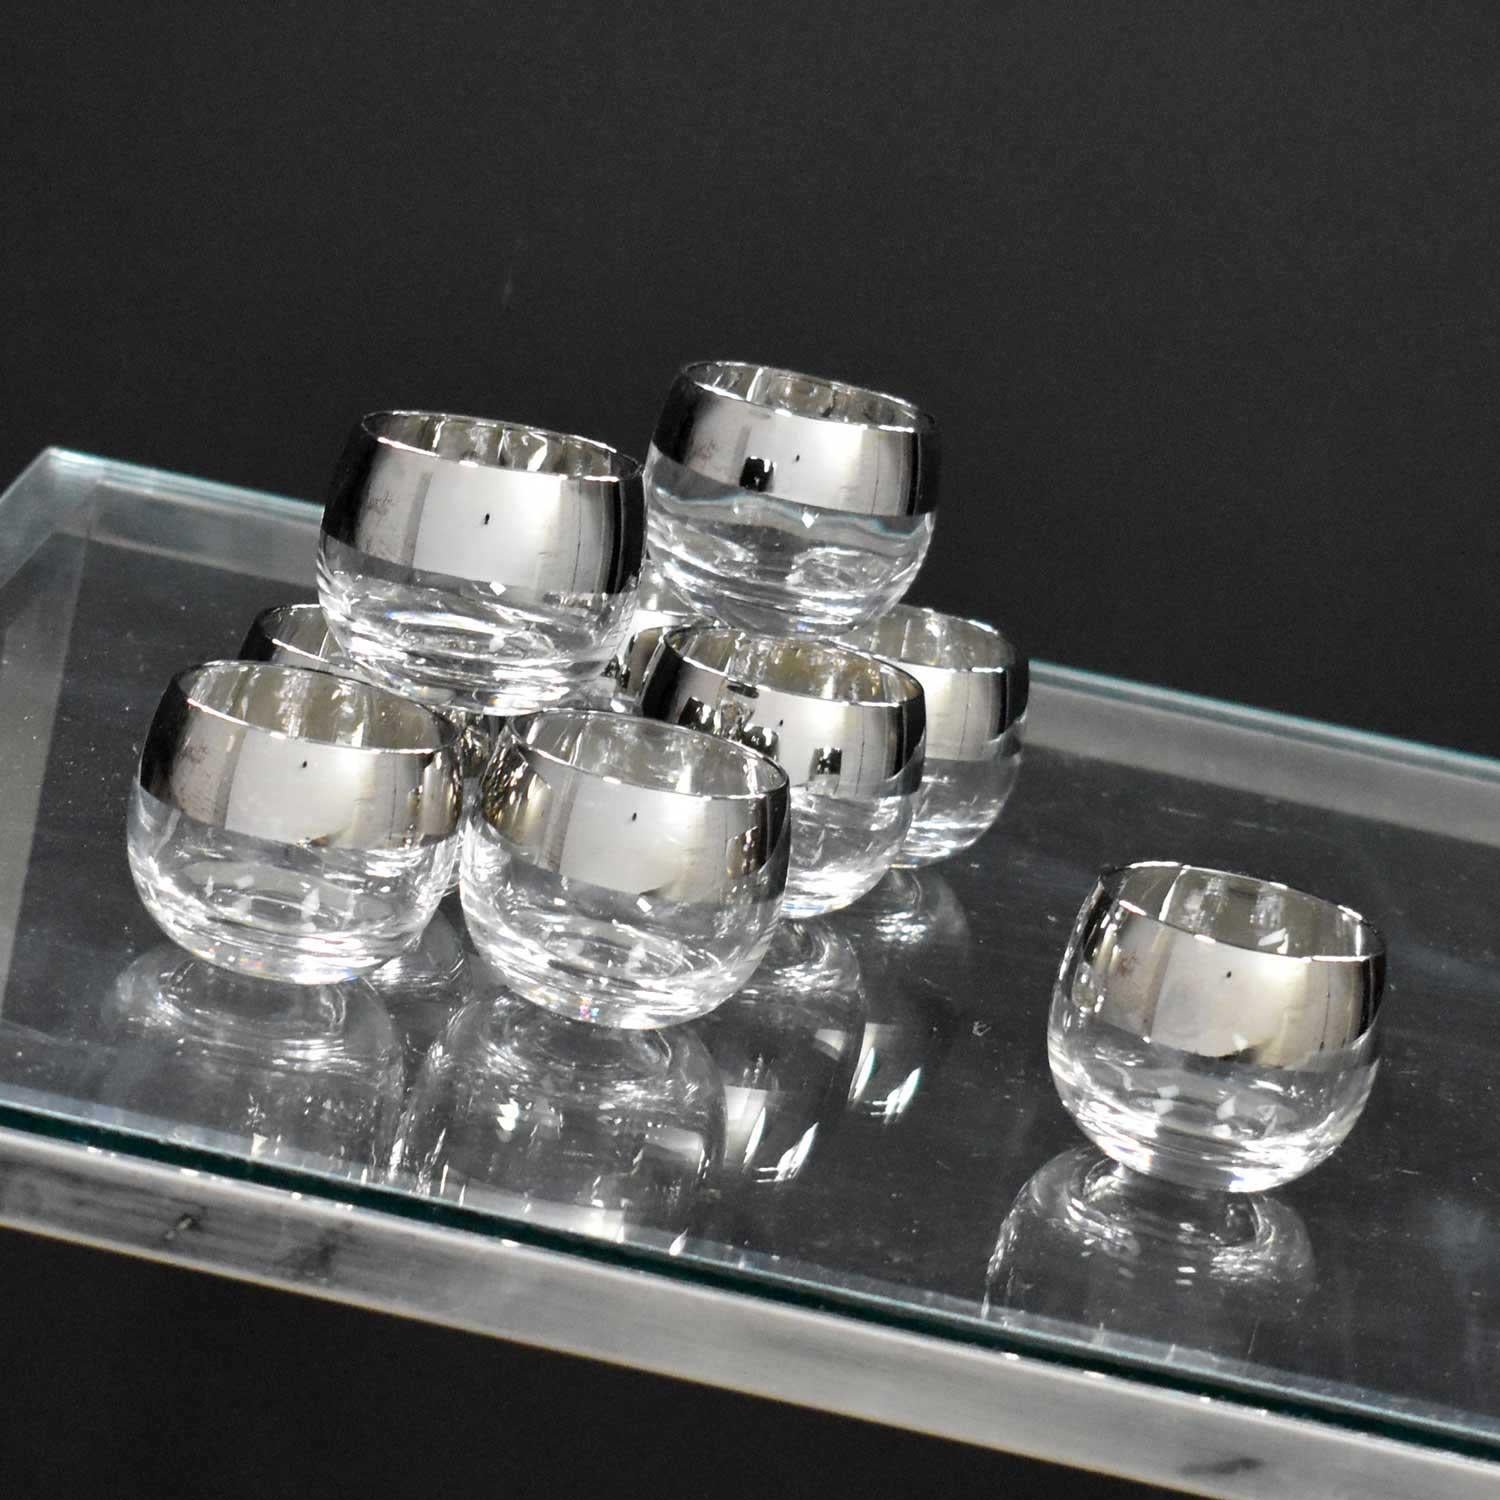 Stunning set of nine silver rimmed roly poly cocktail glasses style of Dorothy Thorpe. They are in wonderful vintage condition with no chips, cracks, or chiggers. There may be small spots of missing silver but nothing major. Please see photos, circa